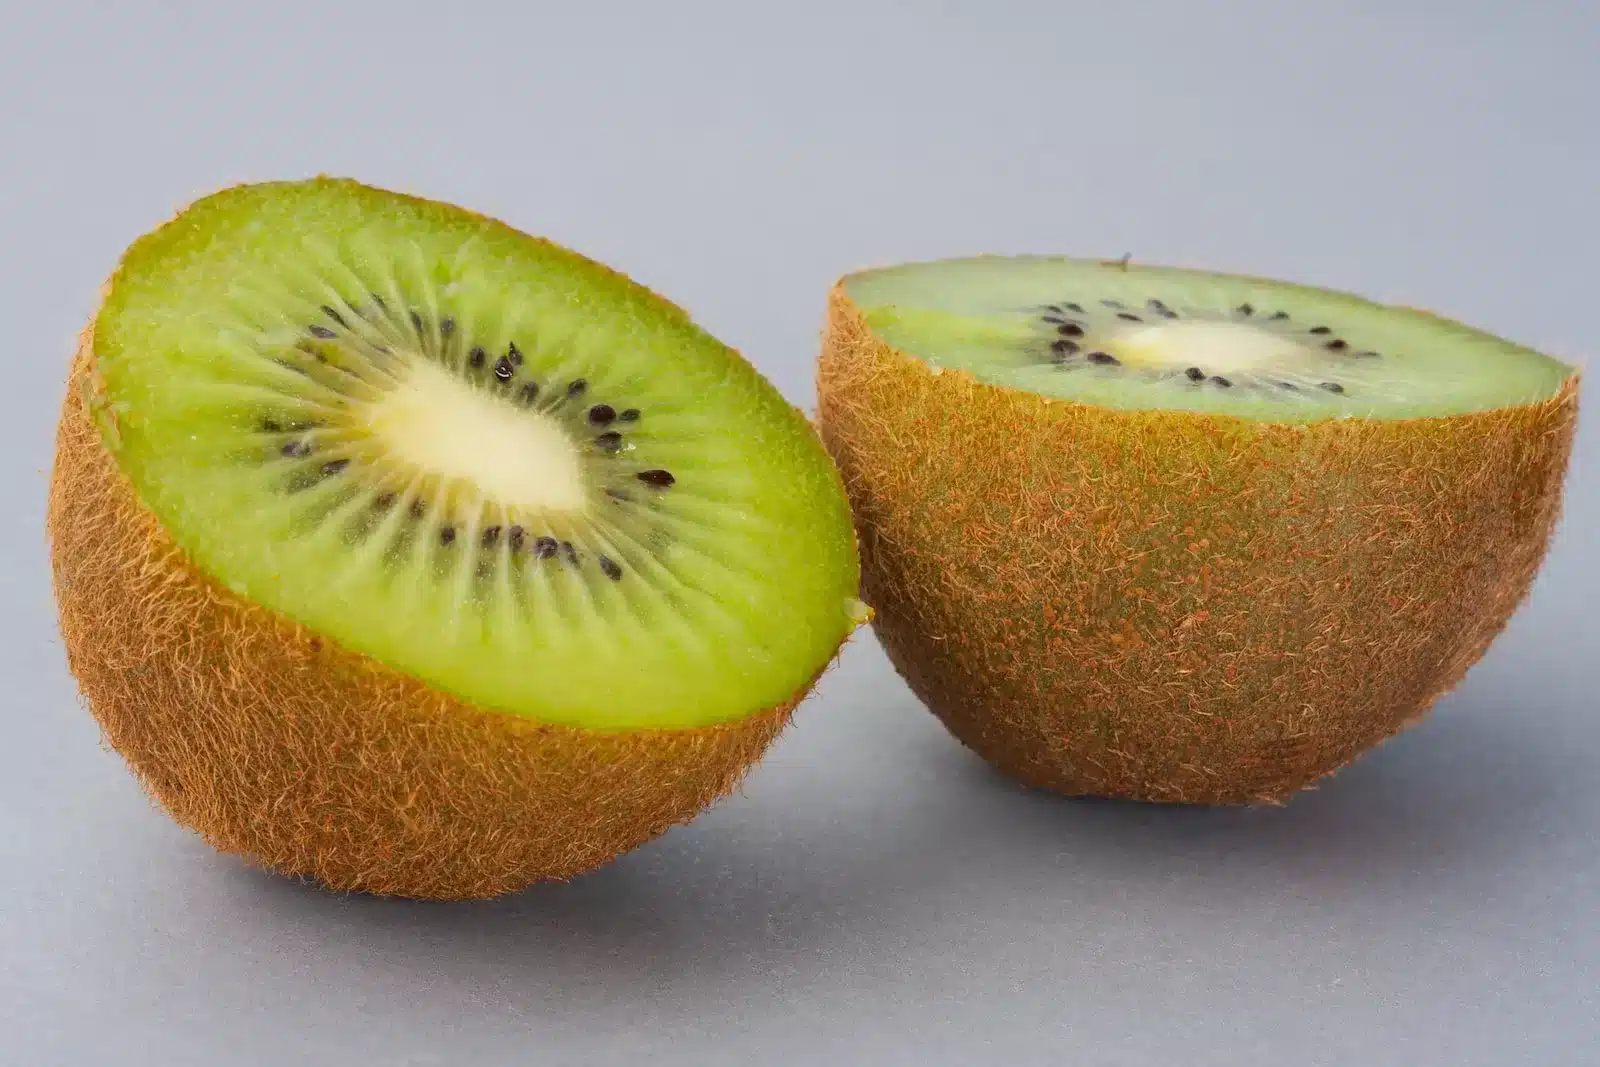 Do Kiwis Need To Be Refrigerated?